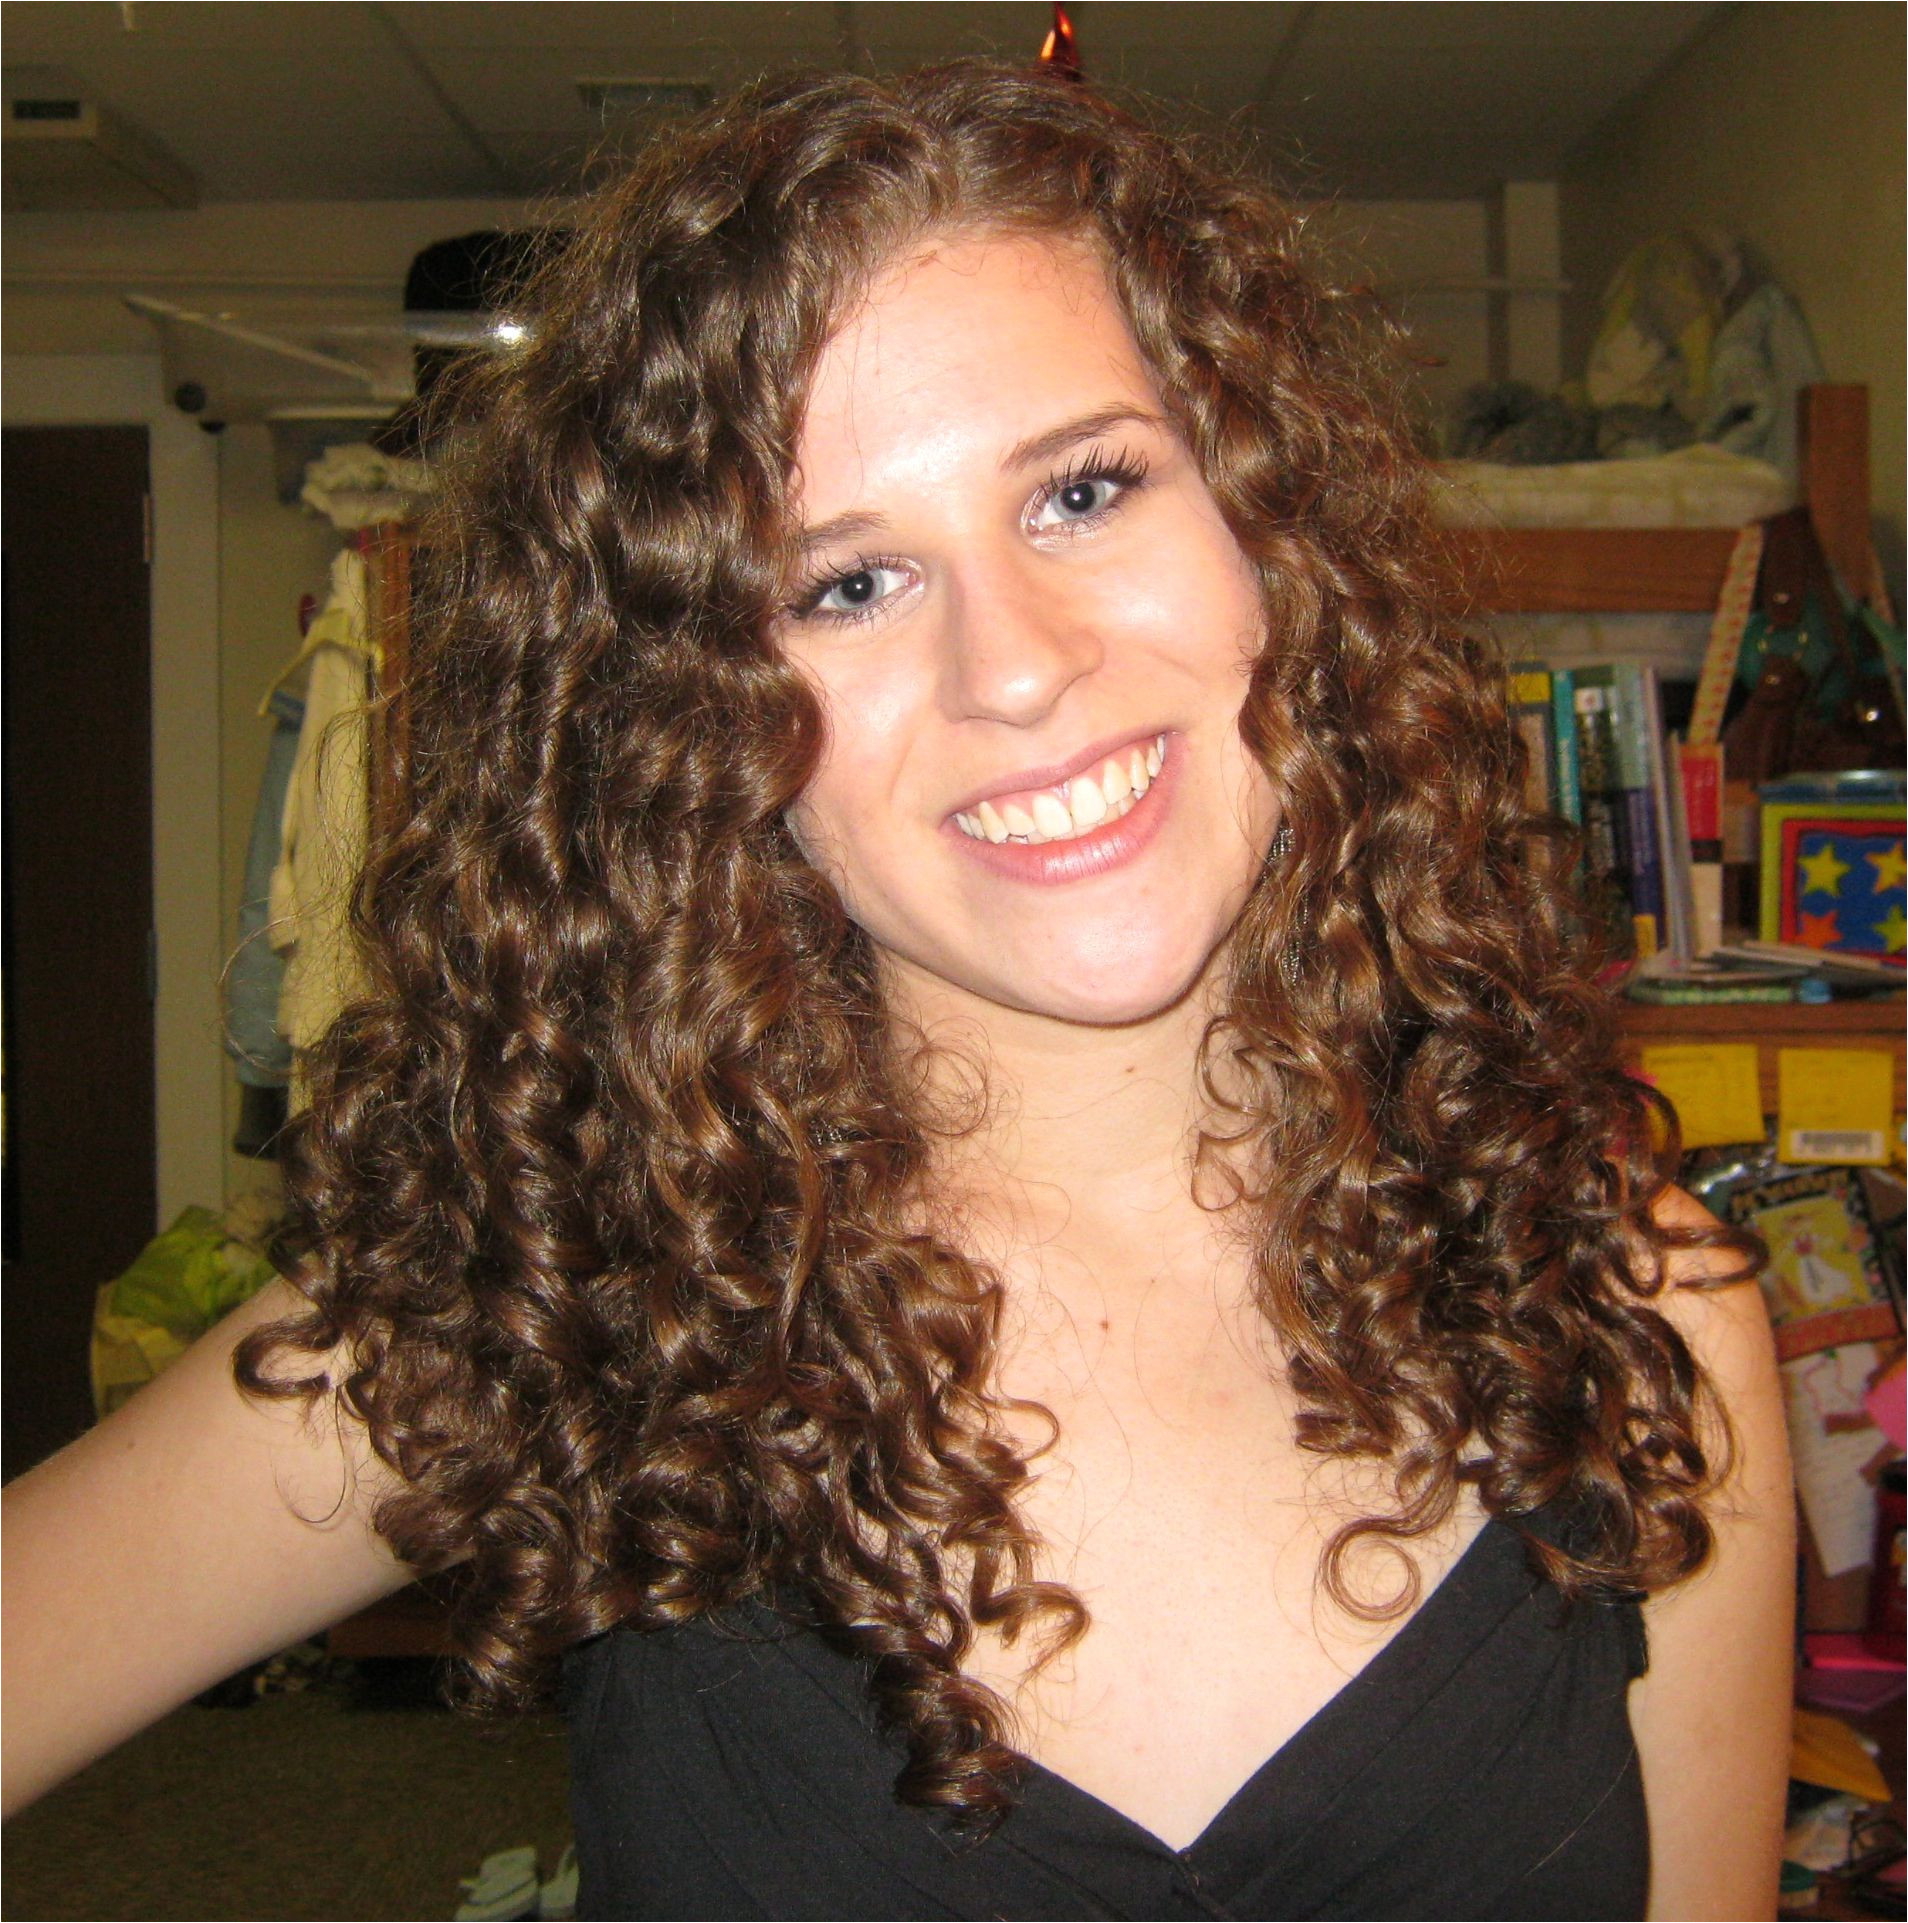 Exciting Very Curly Hairstyles Fresh Curly Hair 0d Archives Hair Style And Inspirational For Hair Colour